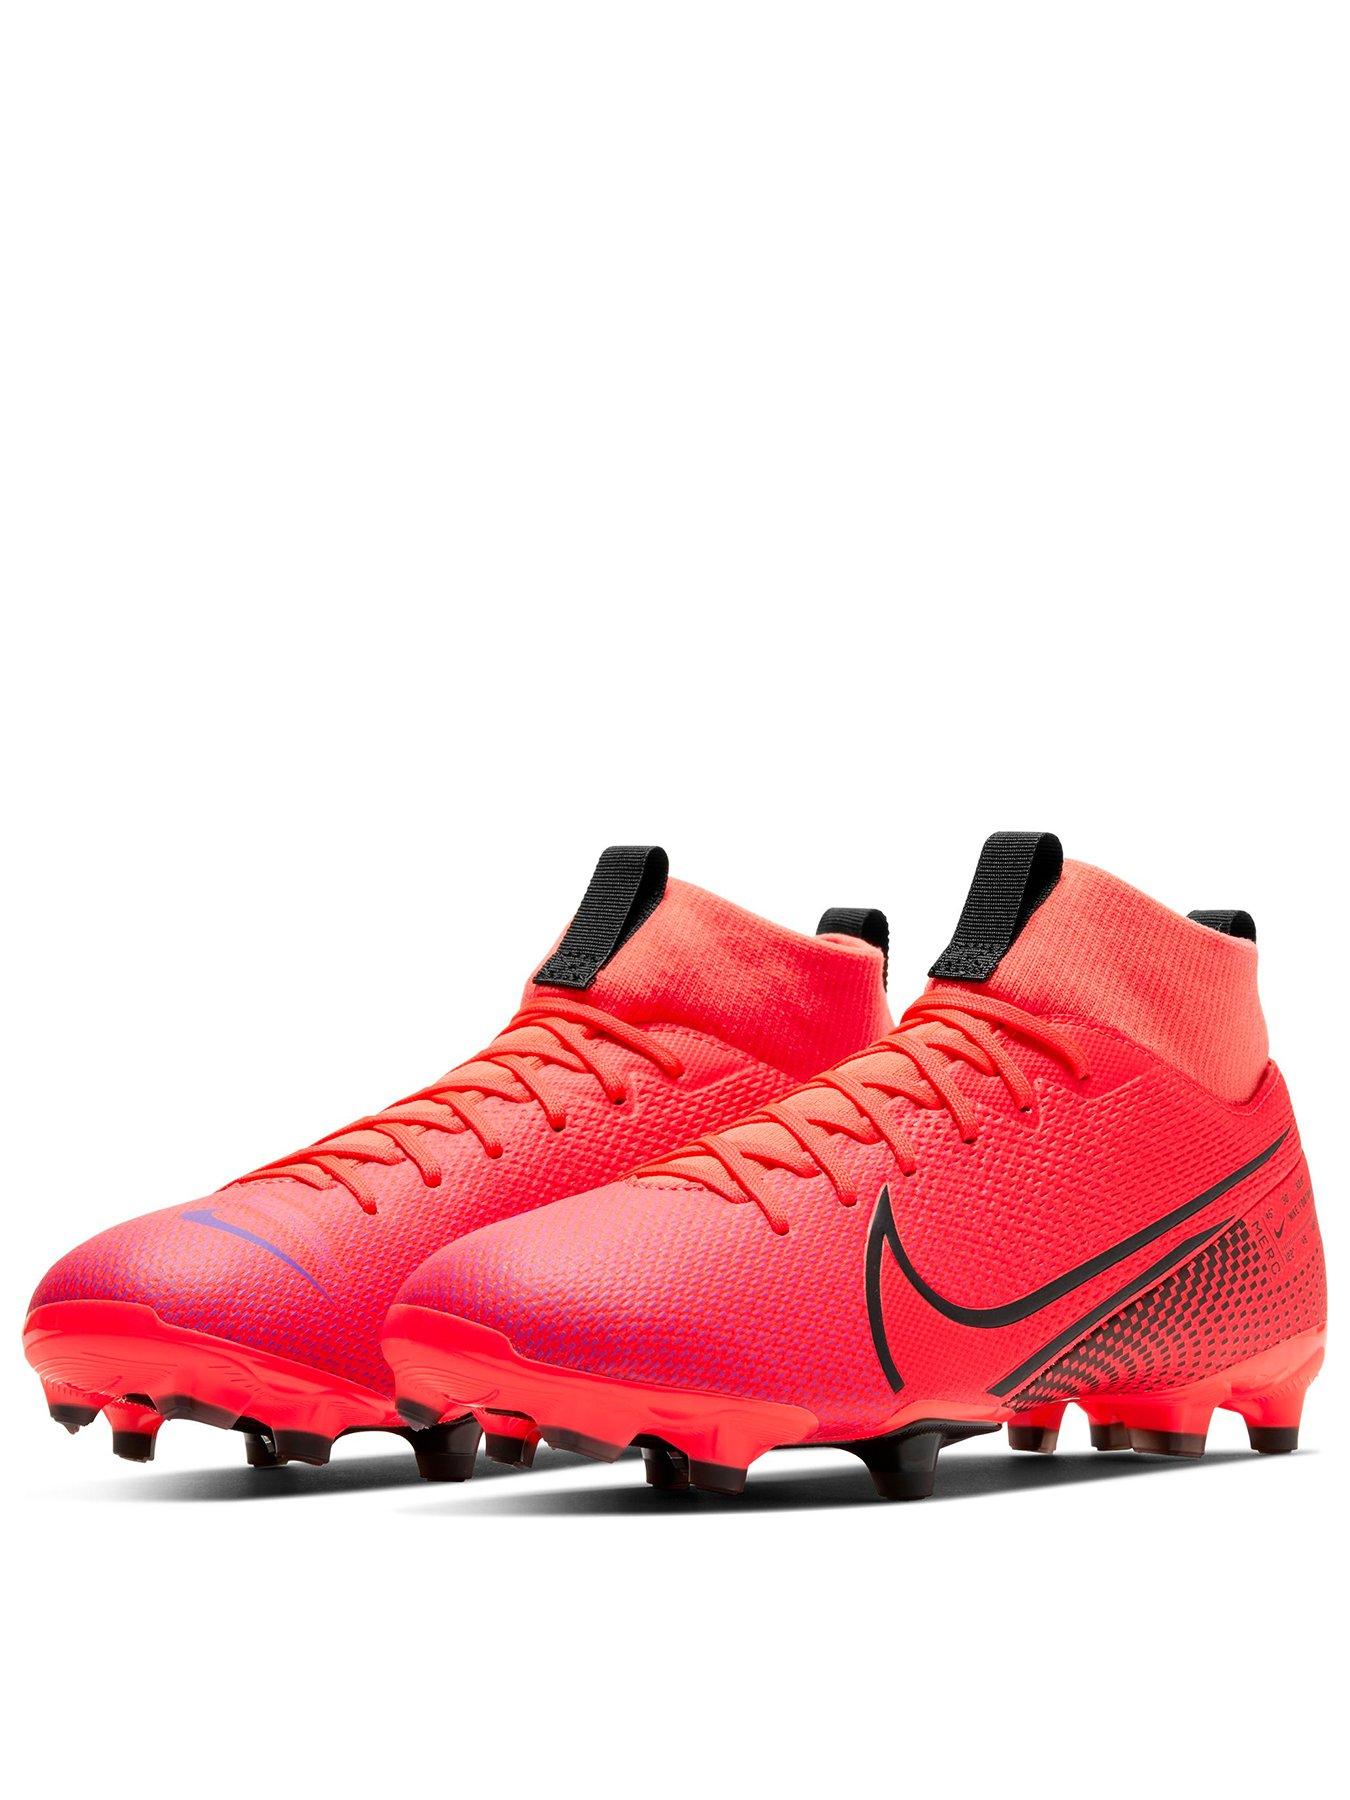 Nike Mercurial Superfly VI Academy GS IC for Black Men